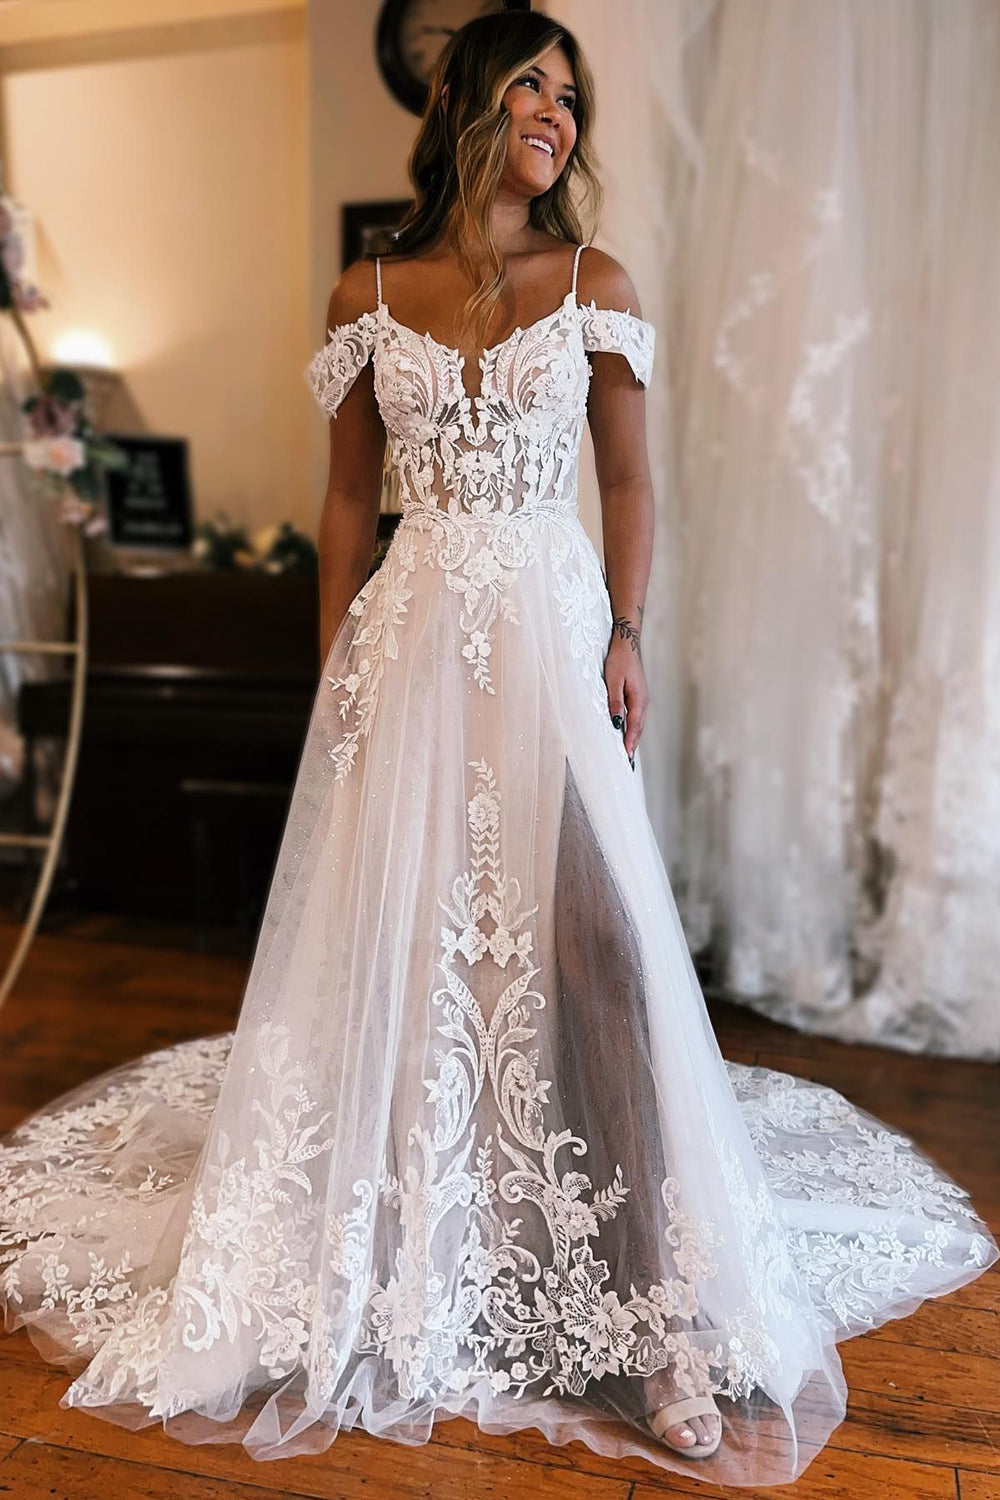 Off The Shoulder A-line Lace Wedding Dress With High Slit.